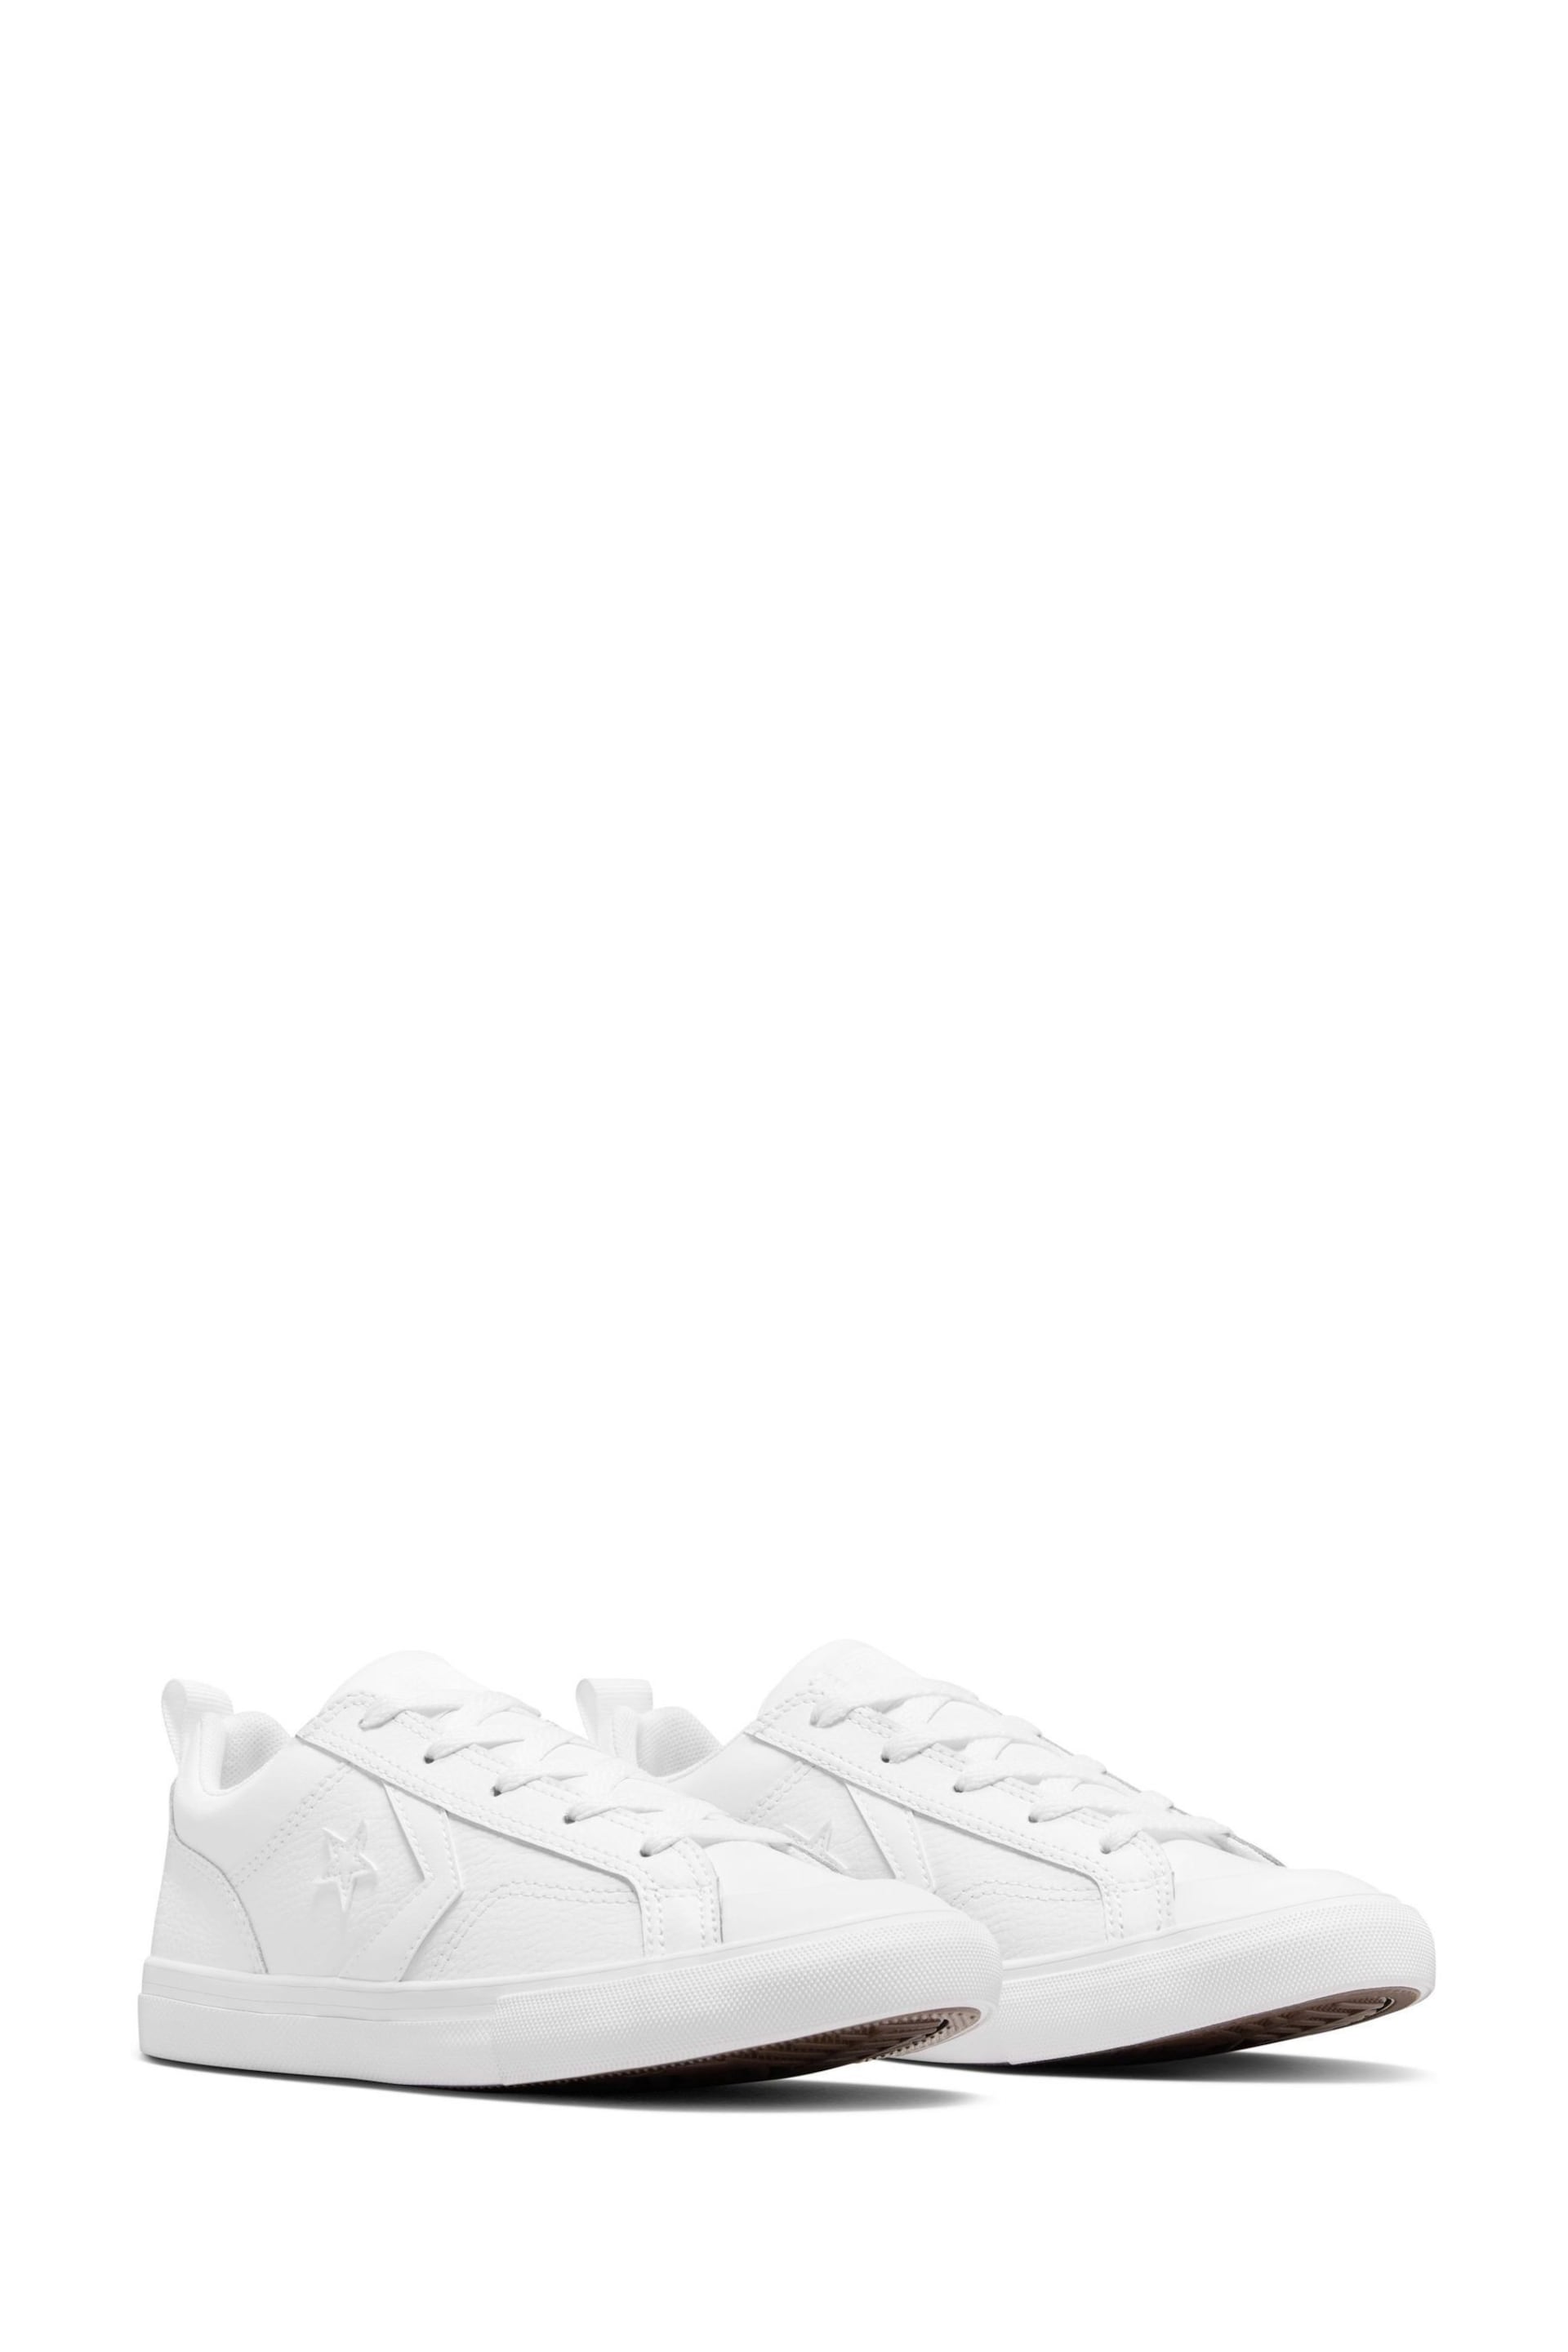 Converse White Youth Pro Blaze Ox Trainers - Image 8 of 8